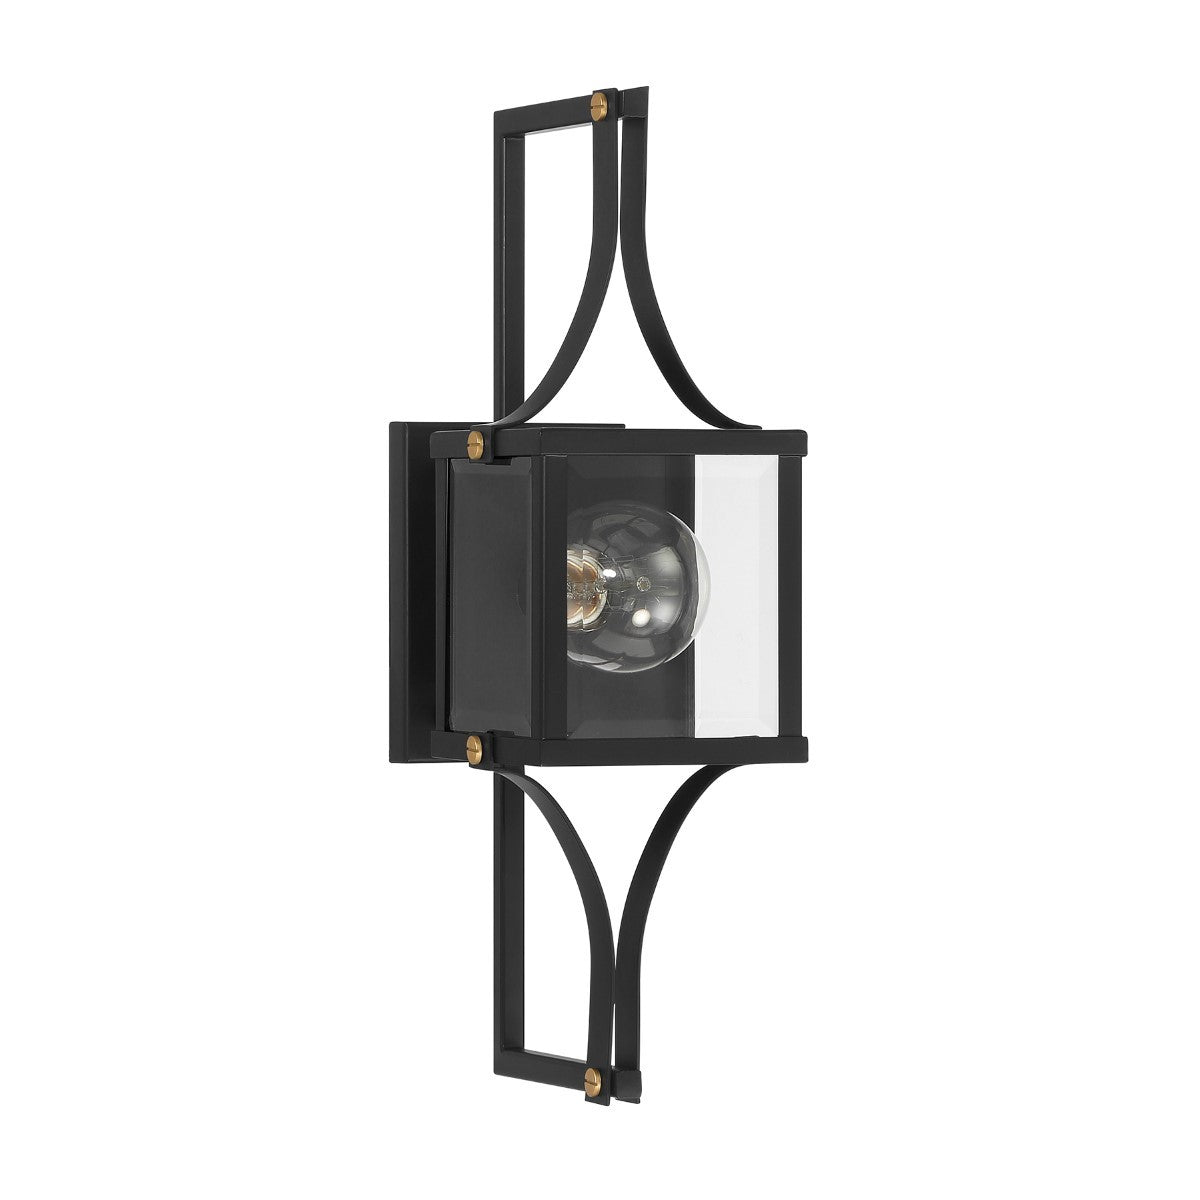 Raeburn 18 in. Outdoor Wall Lantern Matte Black and Weathered Brushed Brass Finish - Bees Lighting